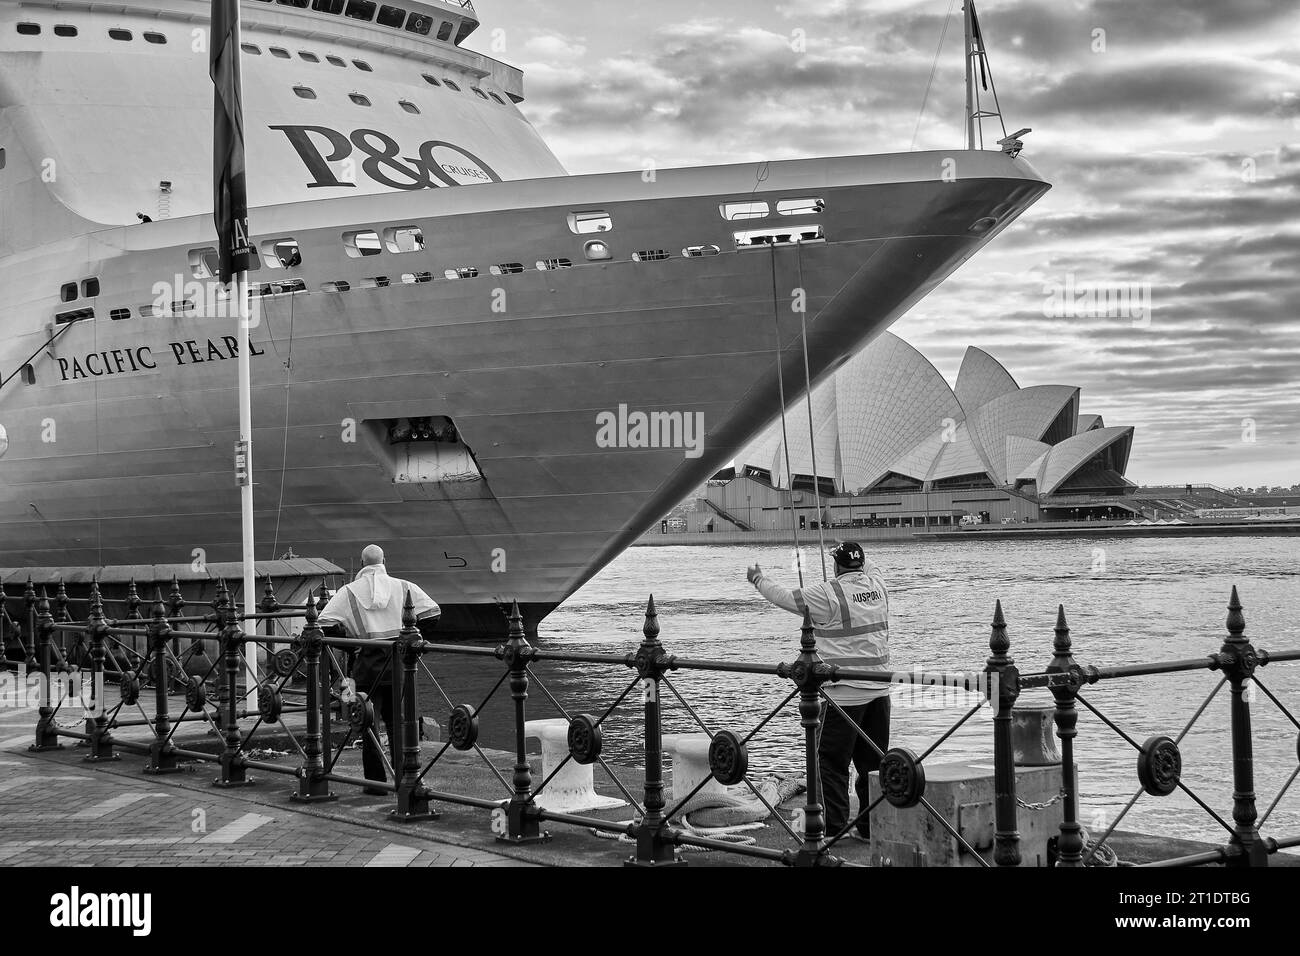 Black And White Photo Of The P&O Cruises Australia, Cruise Ship, MV PACIFIC PEARL Docks  In Circular Quay, Sidney After Sunrise. Stock Photo